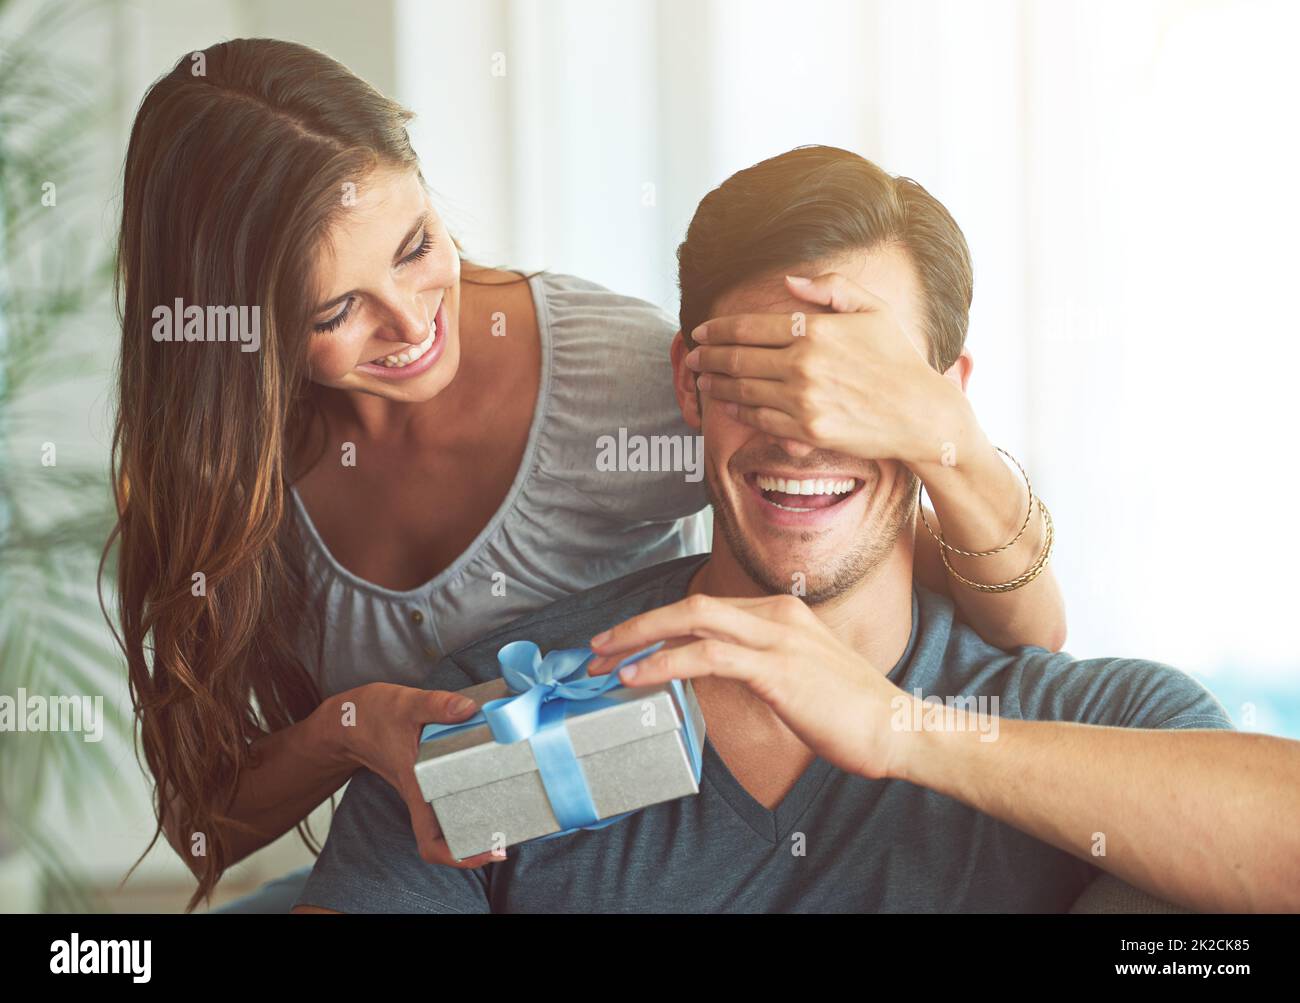 I got you something, honey. A young woman covering her husbands eyes for a surprise gift. Stock Photo